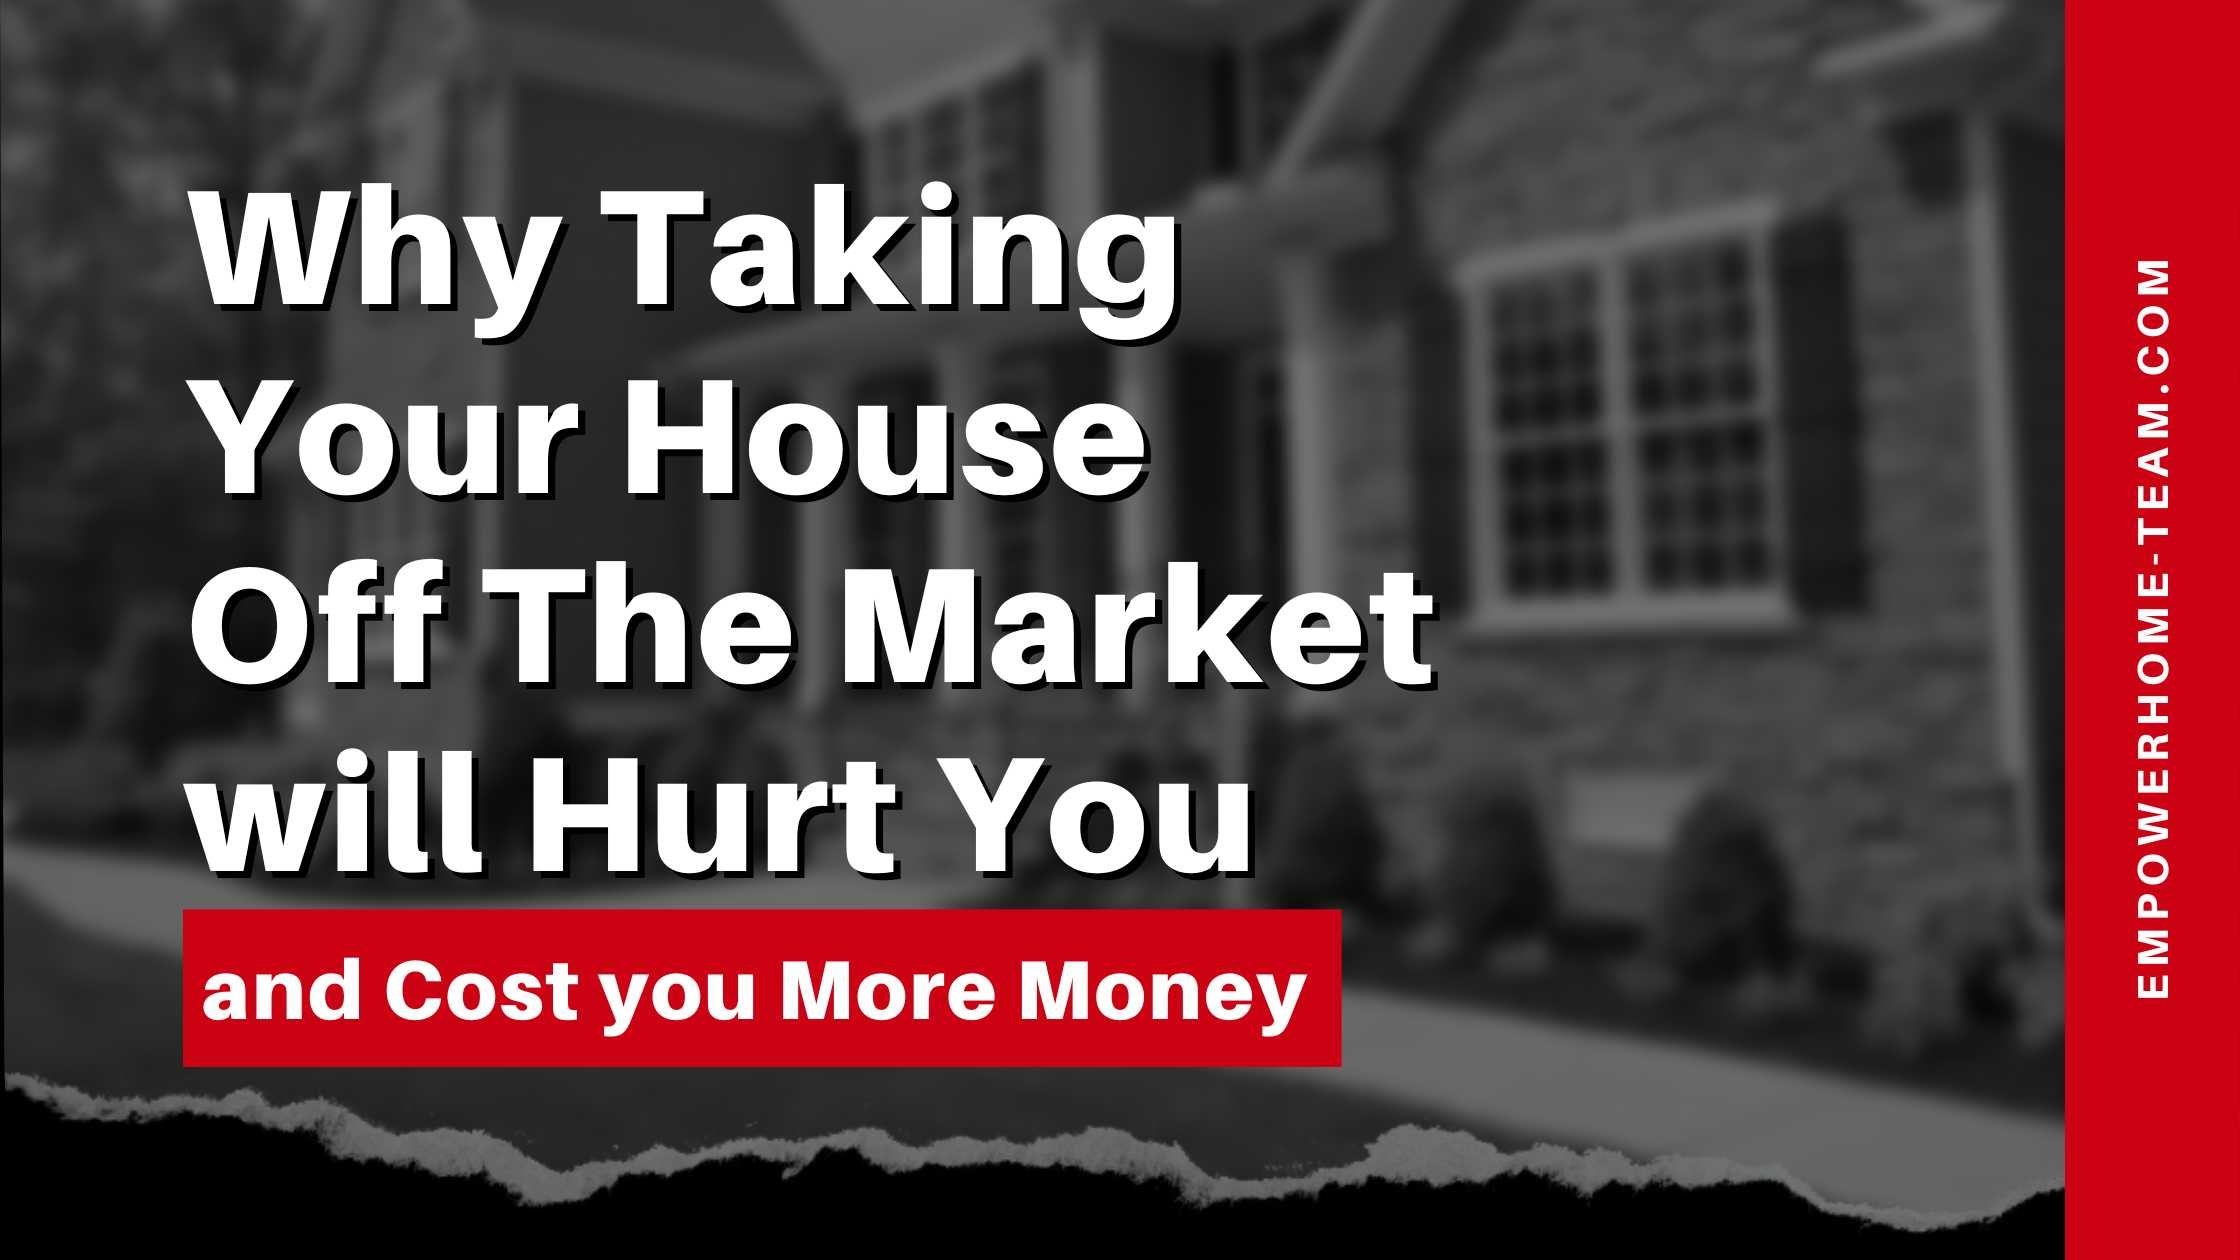 Why Taking Your House Off The Market will Hurt You and Cost you More Money in Dallas, TX